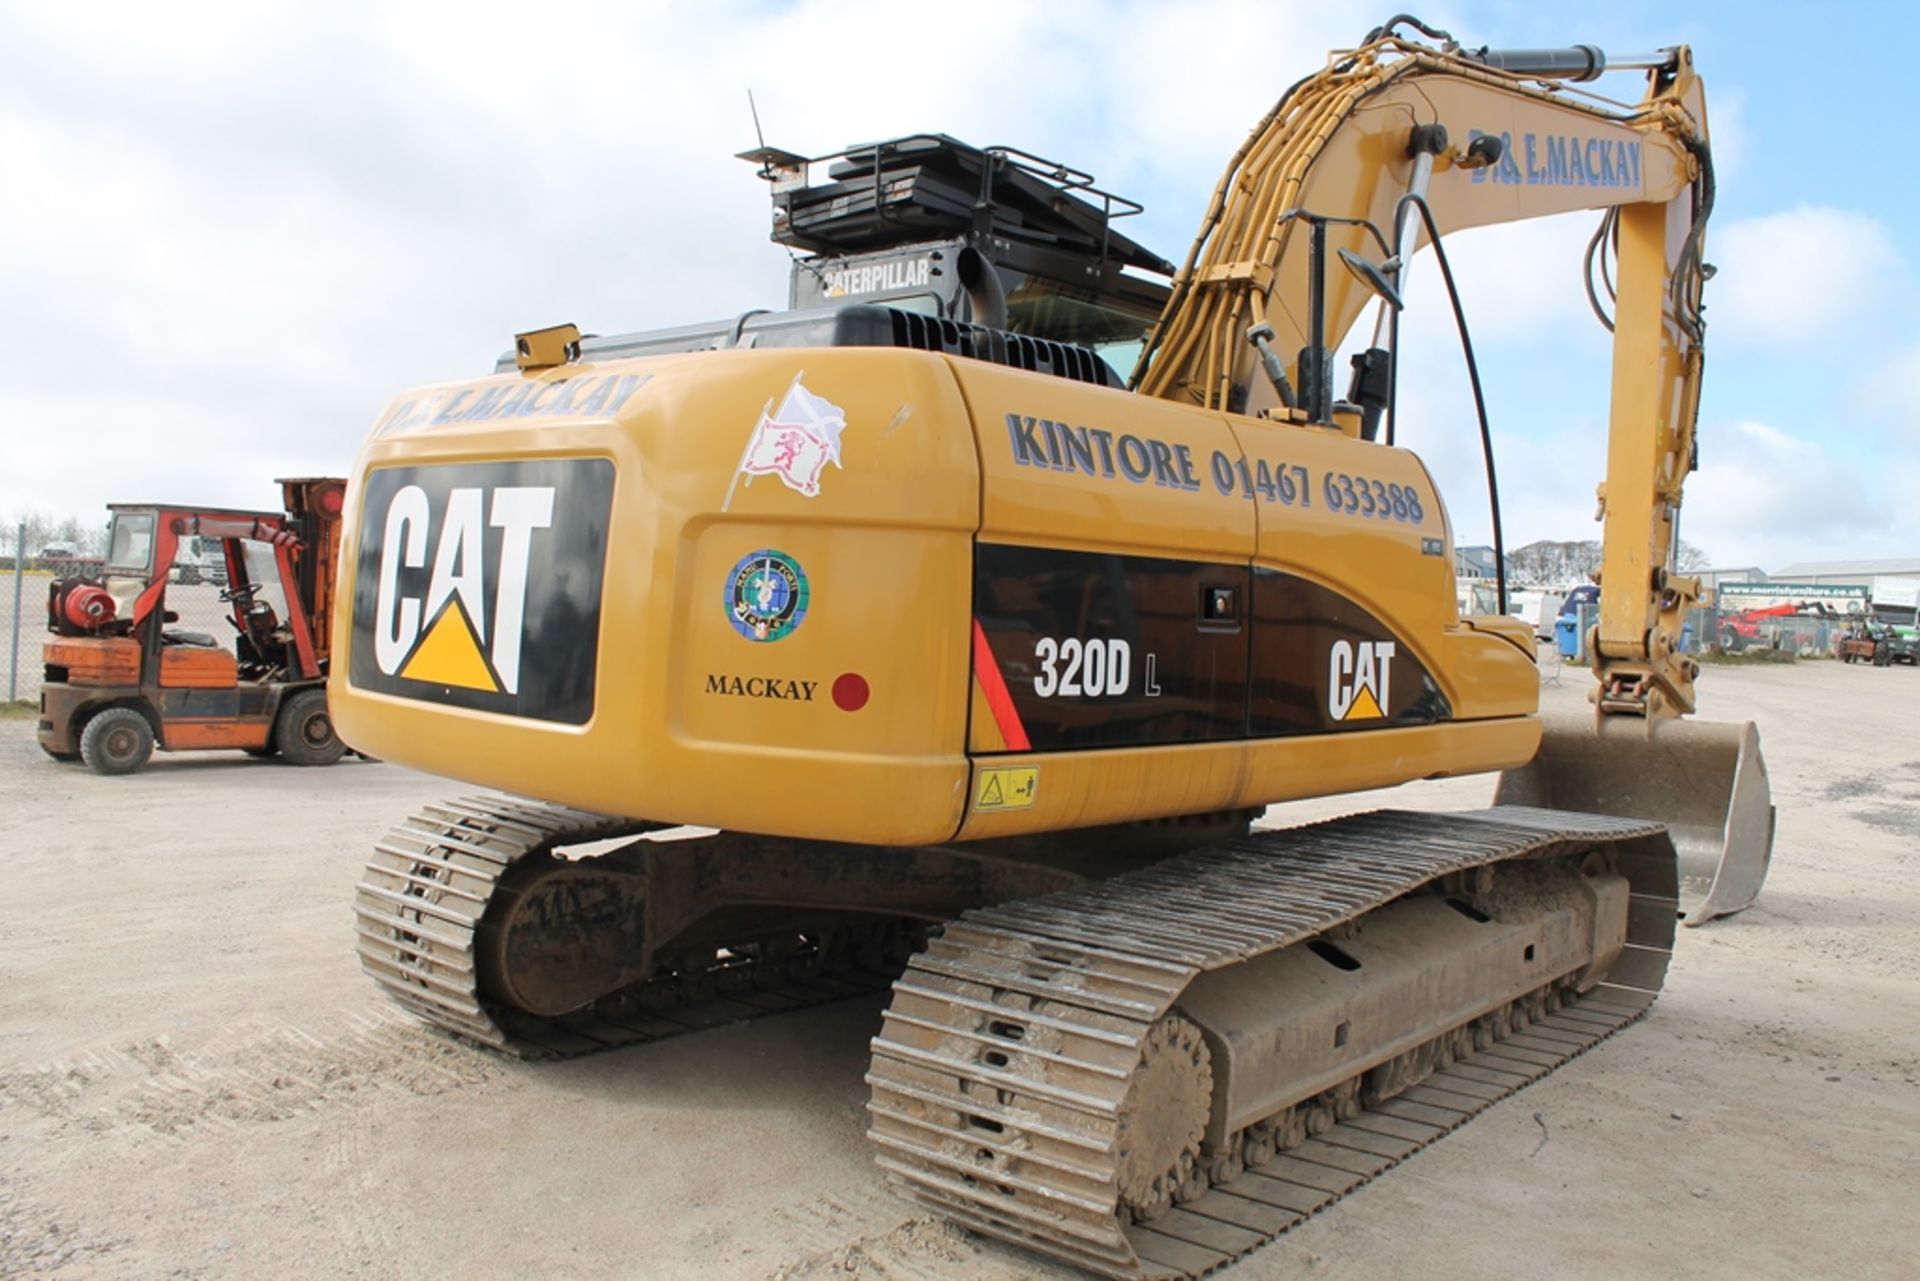 CATERPILLAR 320DL, NOV- 2010, 9108HRS, New tracks & sprockets fitted March 2016, PLUS VAT, , H - Image 7 of 9